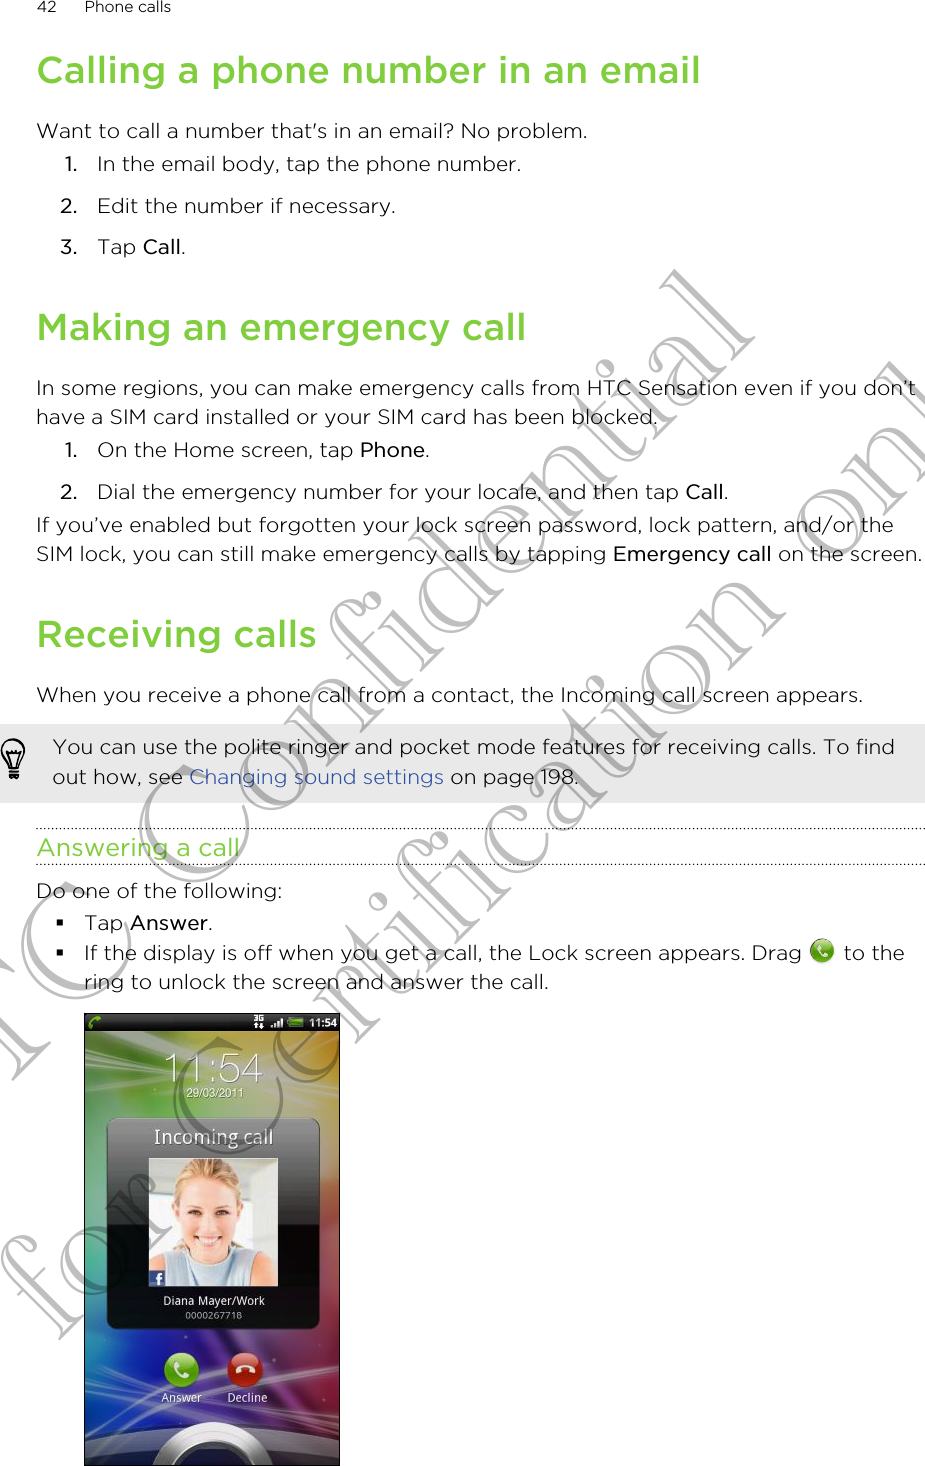 Calling a phone number in an emailWant to call a number that&apos;s in an email? No problem.1. In the email body, tap the phone number.2. Edit the number if necessary.3. Tap Call.Making an emergency callIn some regions, you can make emergency calls from HTC Sensation even if you don’thave a SIM card installed or your SIM card has been blocked.1. On the Home screen, tap Phone.2. Dial the emergency number for your locale, and then tap Call.If you’ve enabled but forgotten your lock screen password, lock pattern, and/or theSIM lock, you can still make emergency calls by tapping Emergency call on the screen.Receiving callsWhen you receive a phone call from a contact, the Incoming call screen appears.You can use the polite ringer and pocket mode features for receiving calls. To findout how, see Changing sound settings on page 198.Answering a callDo one of the following:§Tap Answer.§If the display is off when you get a call, the Lock screen appears. Drag   to thering to unlock the screen and answer the call.42 Phone callsHTC Confidential for Certification only